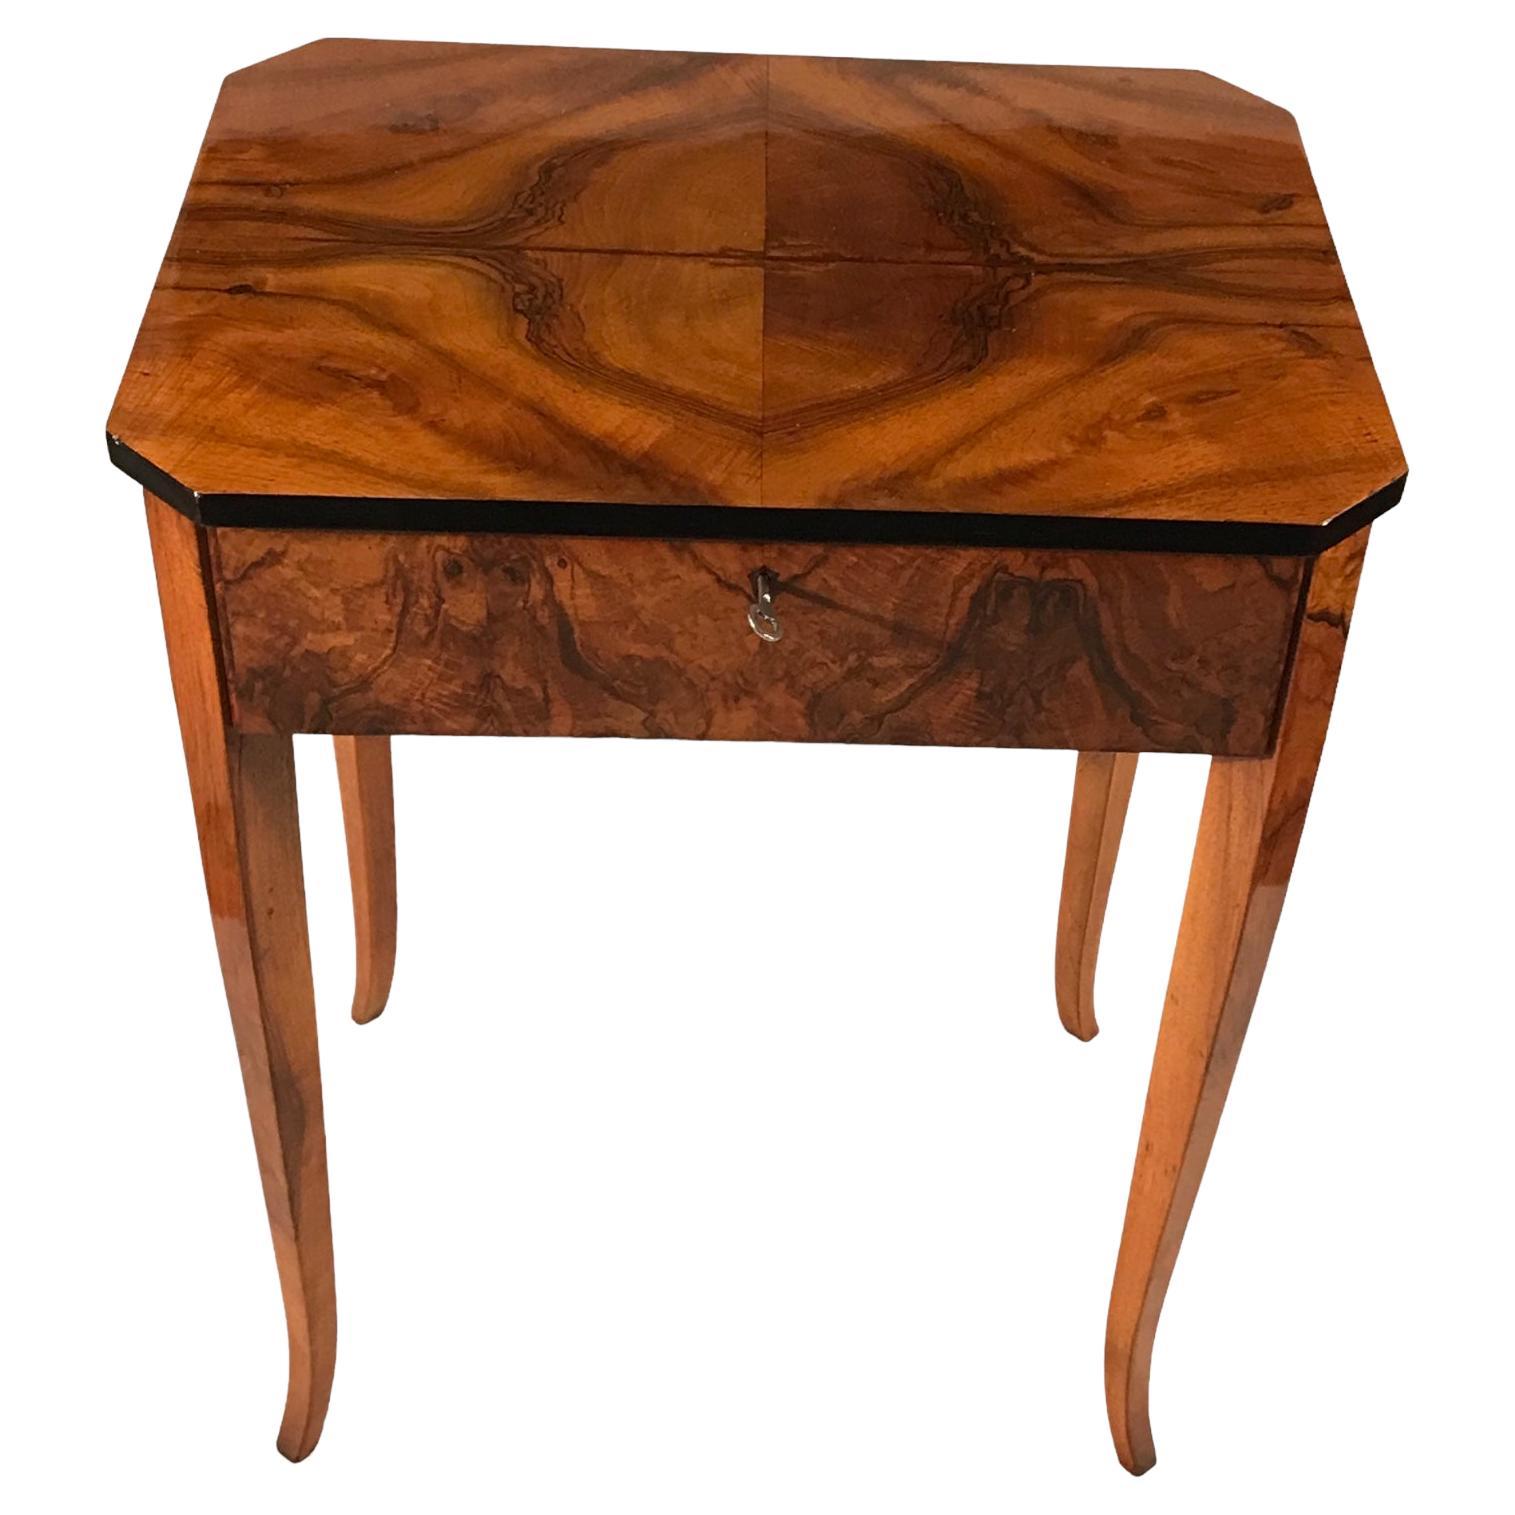 Explore a Rare Biedermeier Table from 1820 Handmade in Southern Germany

This exceptional Biedermeier table, originating from approximately 1820, showcases the exquisite craftsmanship of Southern Germany. Crafted with care, it boasts an alluring